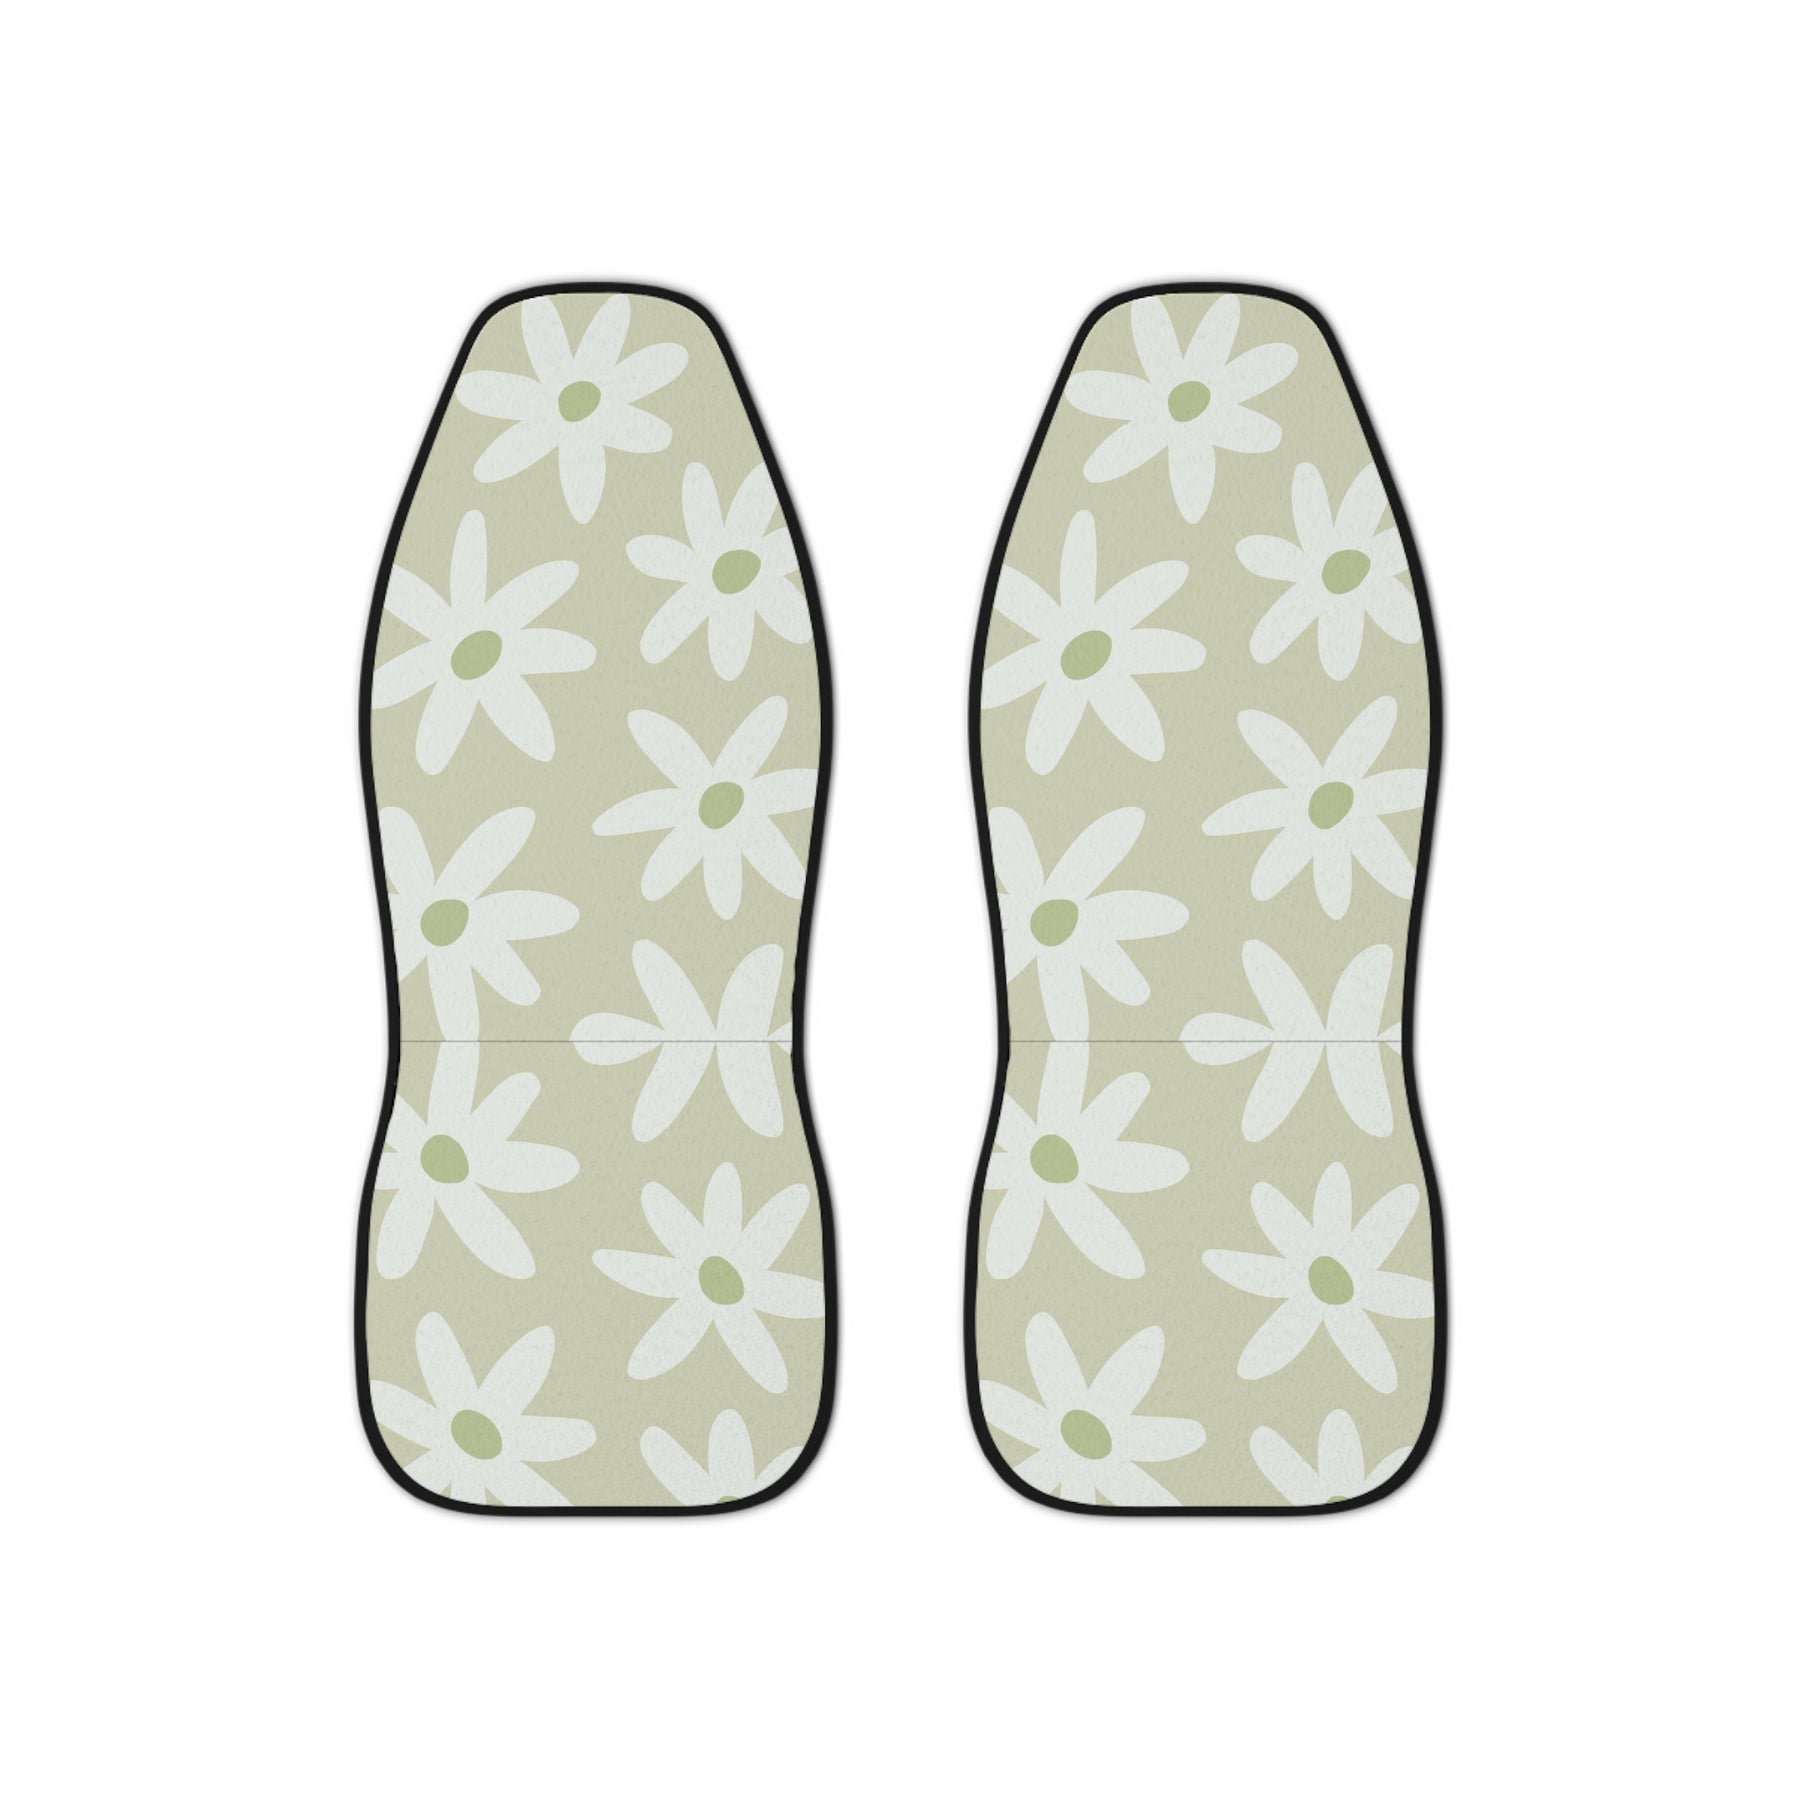 Cute Sage Green Car Seat Covers Set of 2,Aesthetic Daisy Car Seat Cover,Gift for new driver,Y2K Retro Vintage car accessories,Boho Car Decor